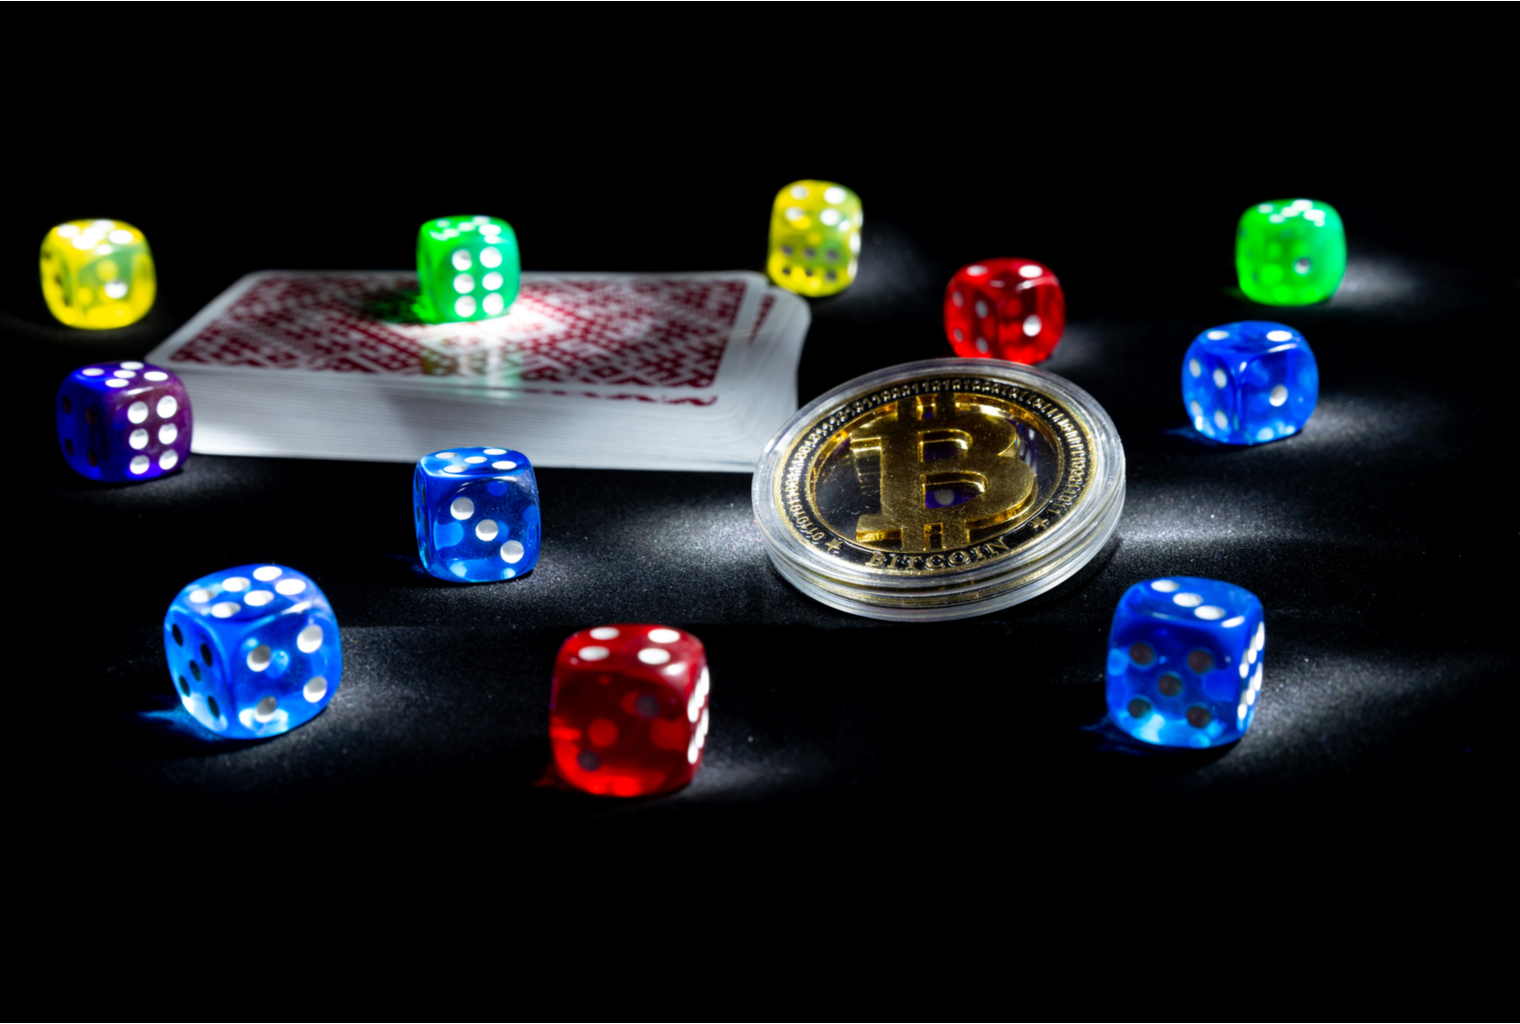 Sick And Tired Of Doing crypto casinos The Old Way? Read This